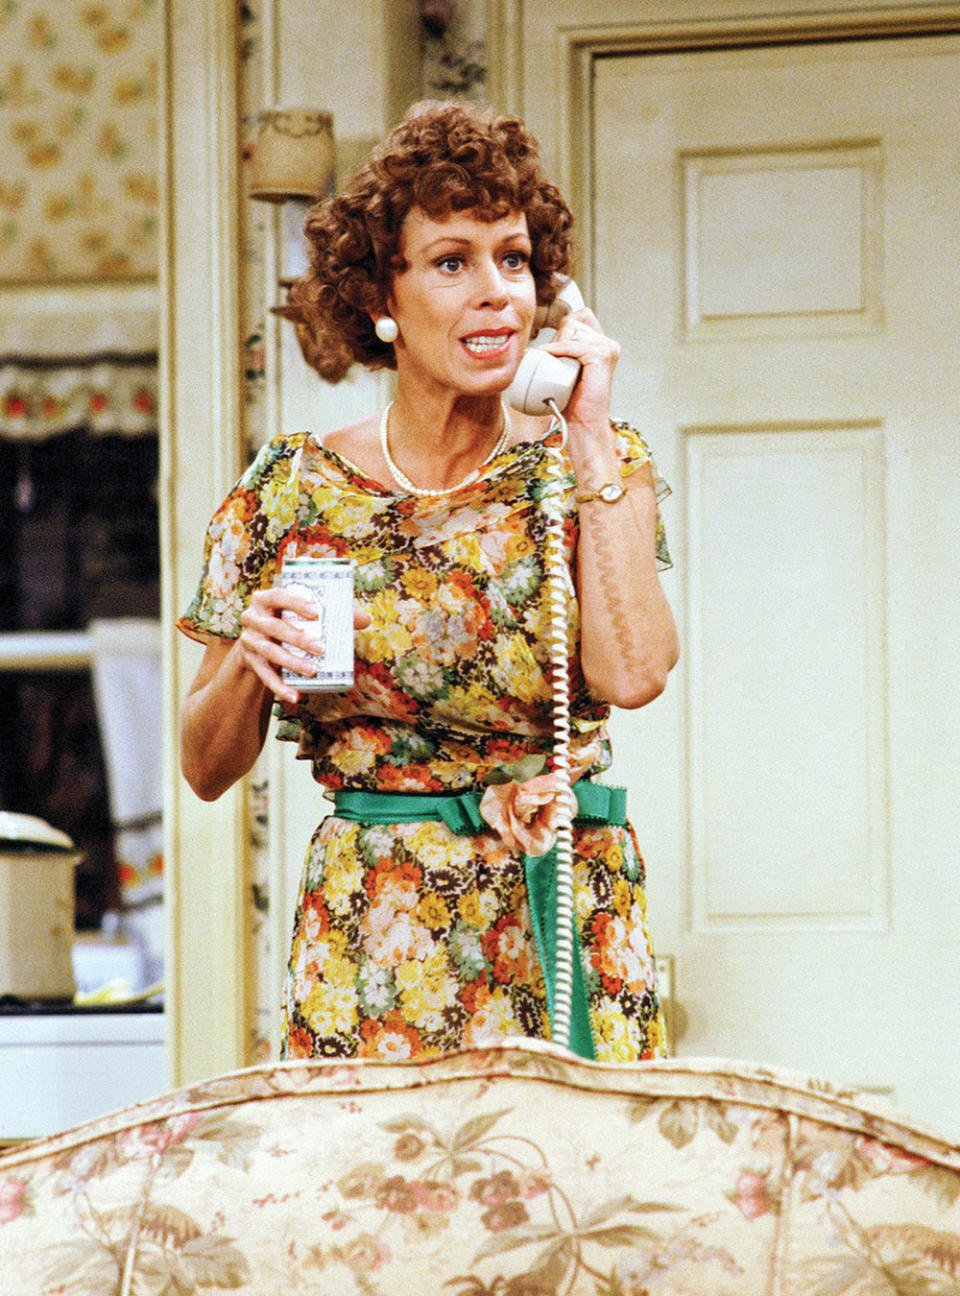 Recurring Carol Burnett Show sketch “The Family” spawned the TV movie Eunice and the long-running Vicki Lawrence series Mama’s Family.